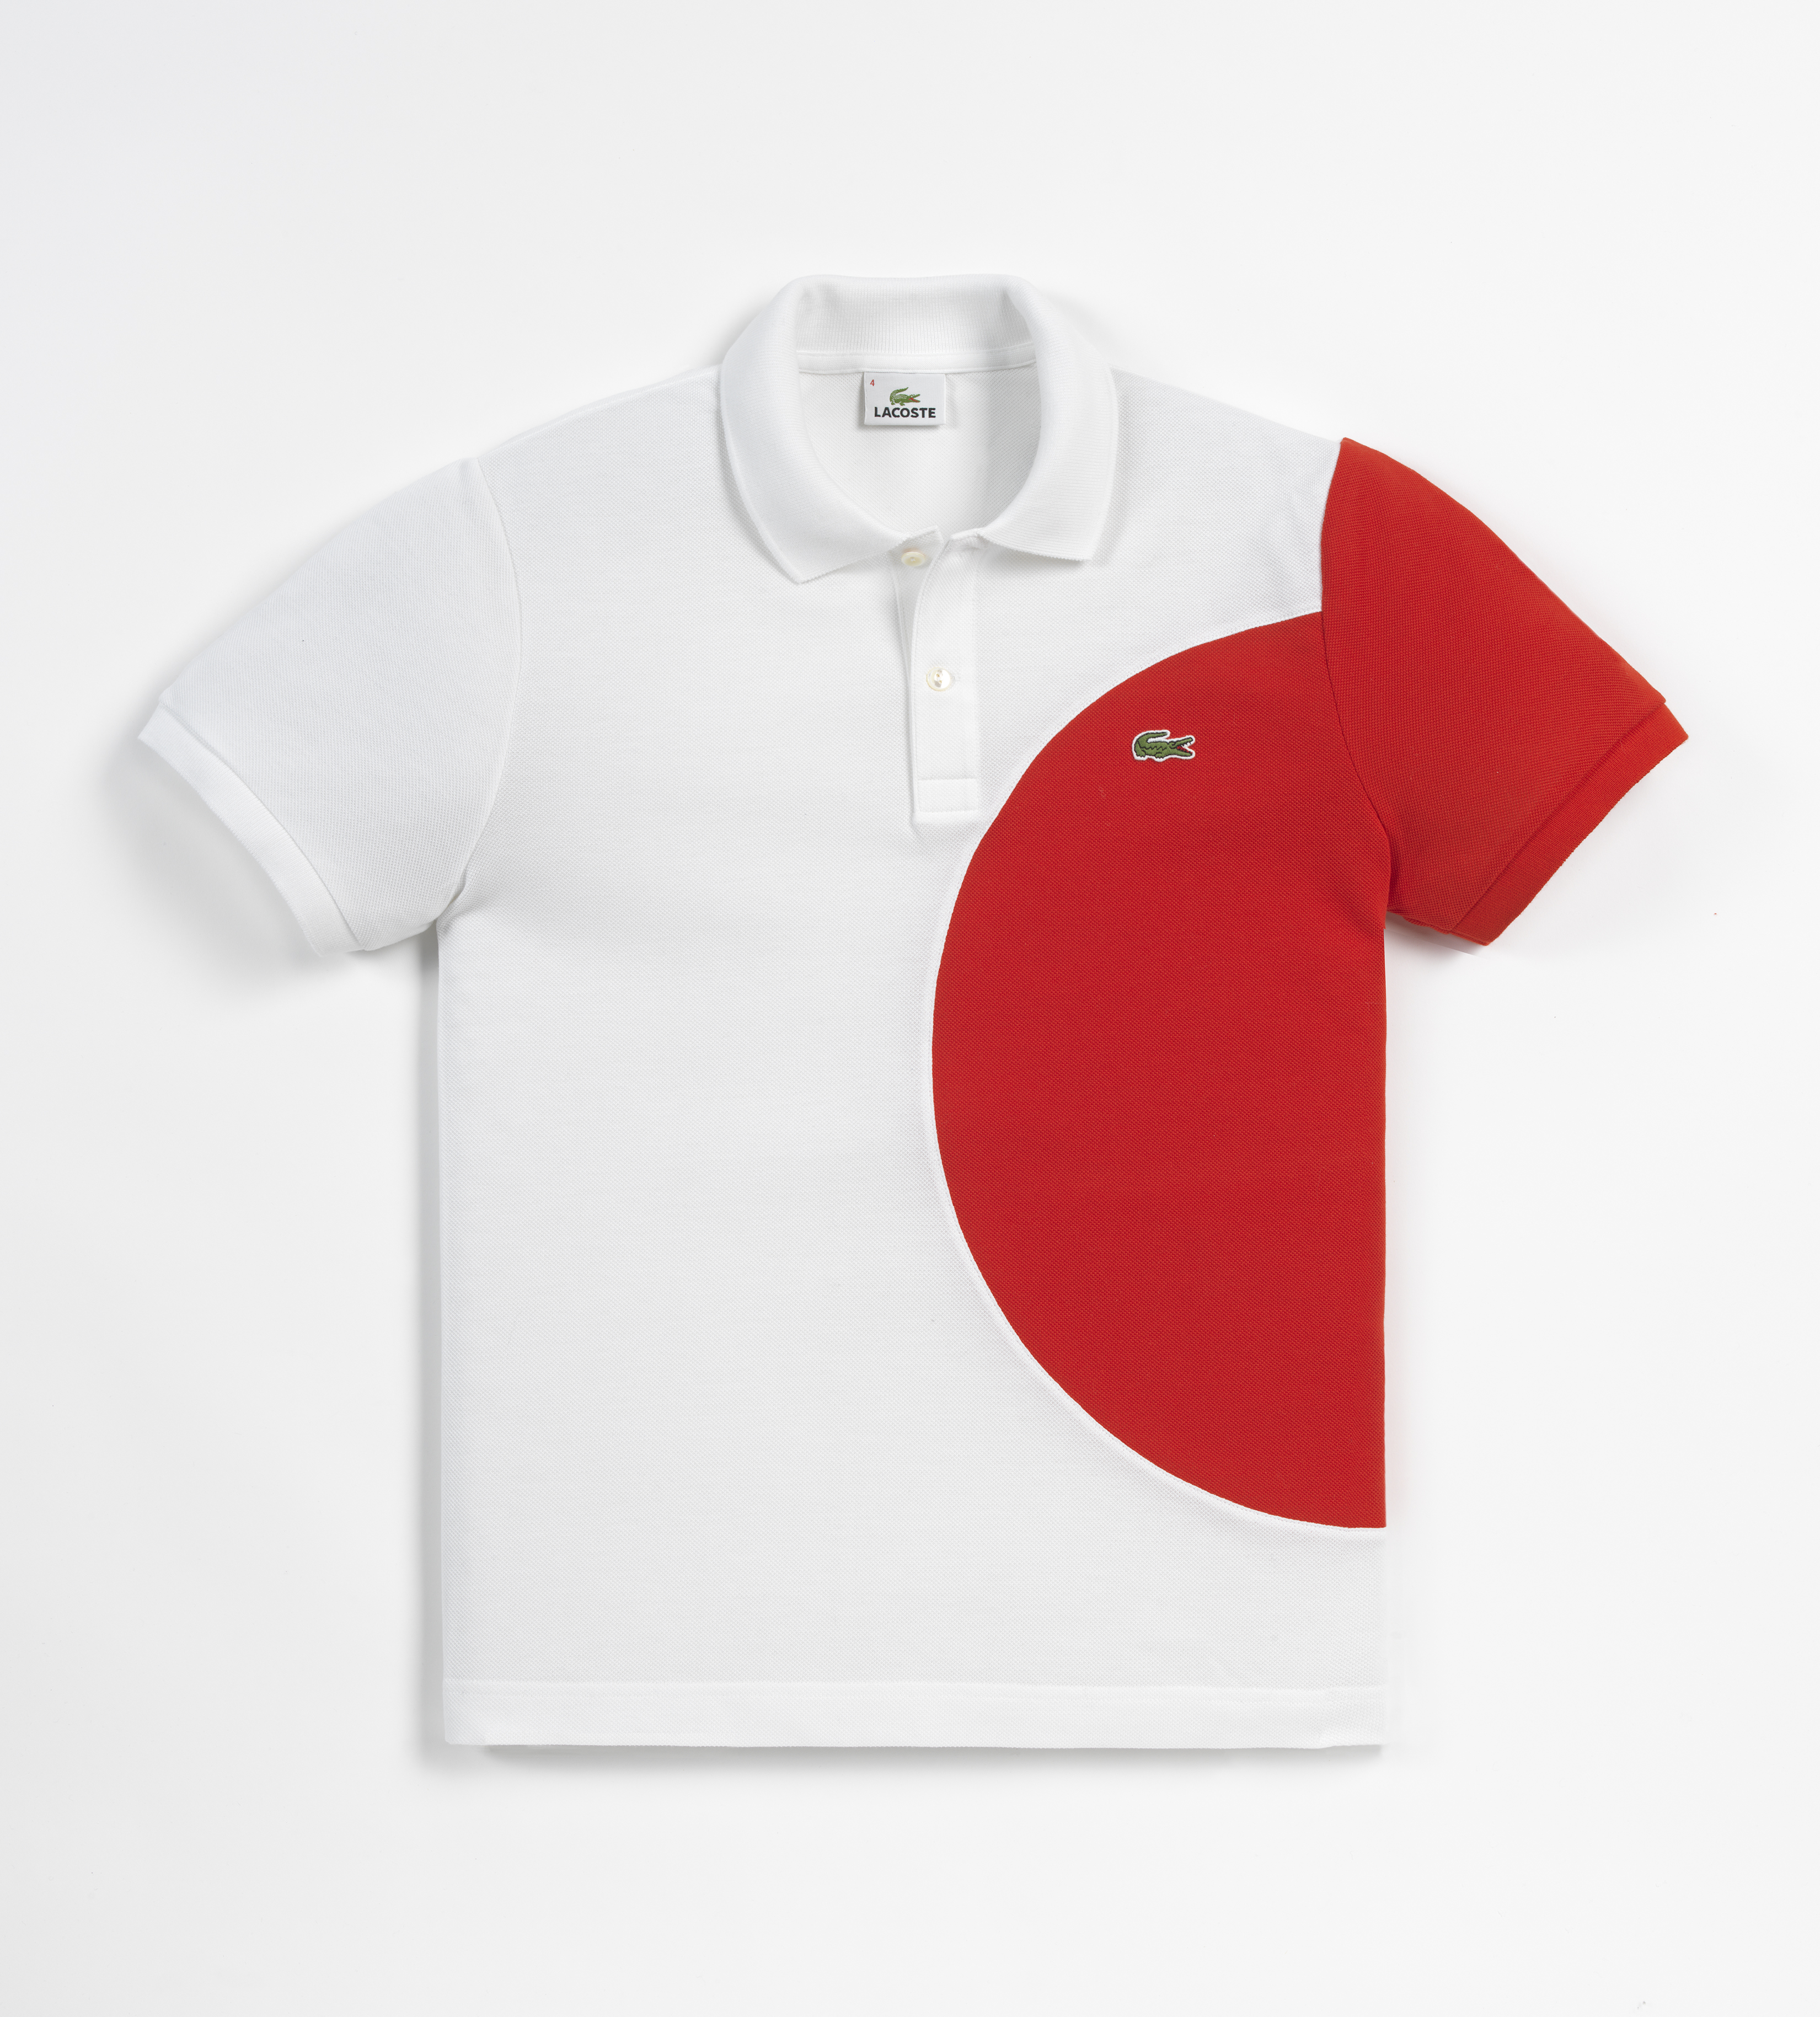 16 Nations – Lacoste goes flagtastic | CLOTHES THE MAN